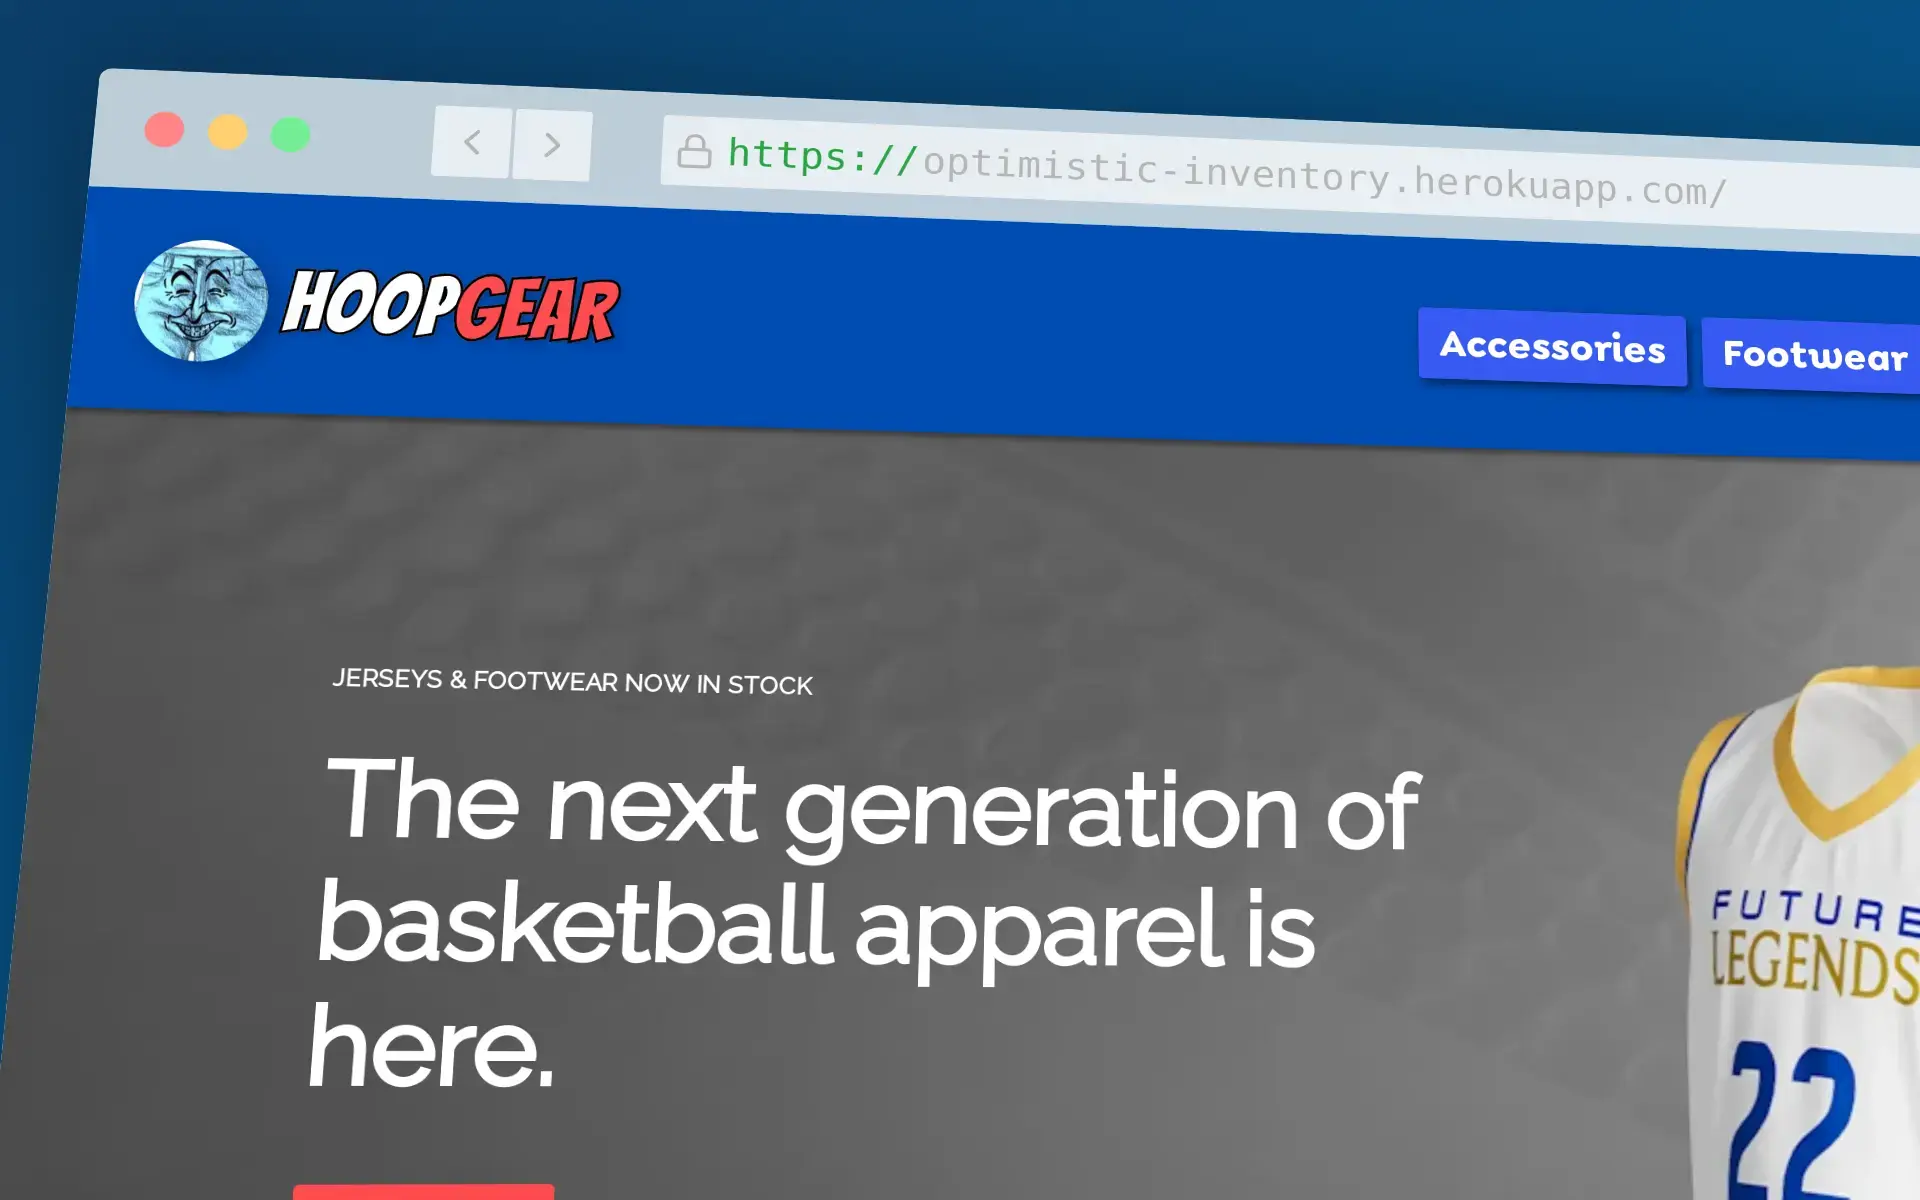 Website header for 'HoopGear' with a smiling trouser logo. Text announces 'The next generation of basketball apparel'. Two buttons labeled 'Accessories' and 'Footwear'.